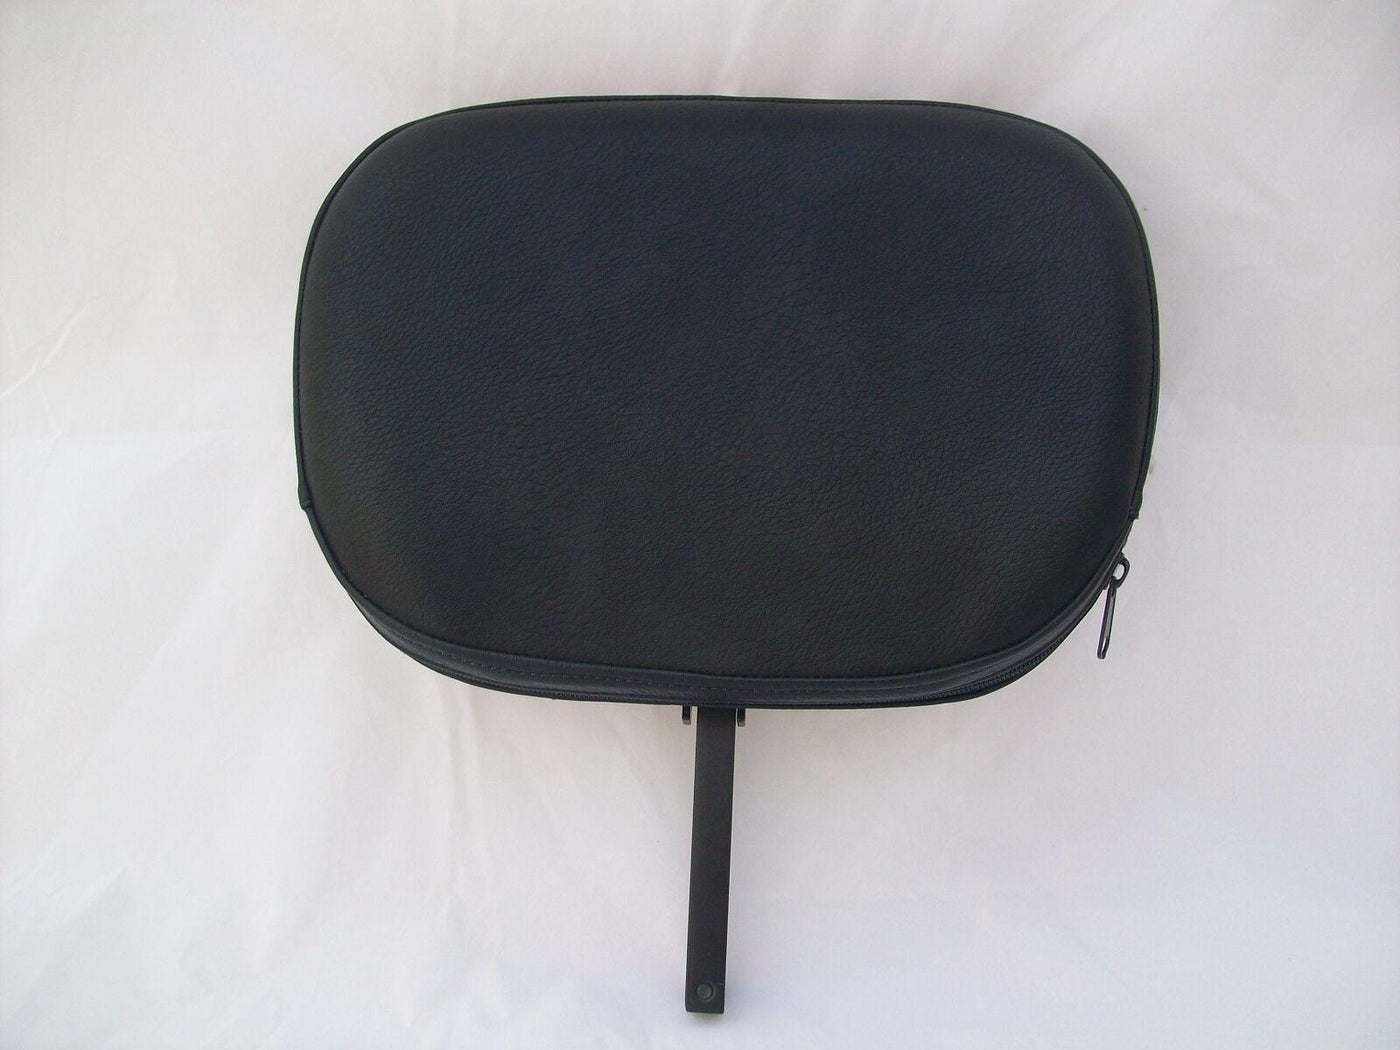 "NEW" Adjustable / Removable Driver / Passenger Backrest for Corbin Seats - Moto Life Products